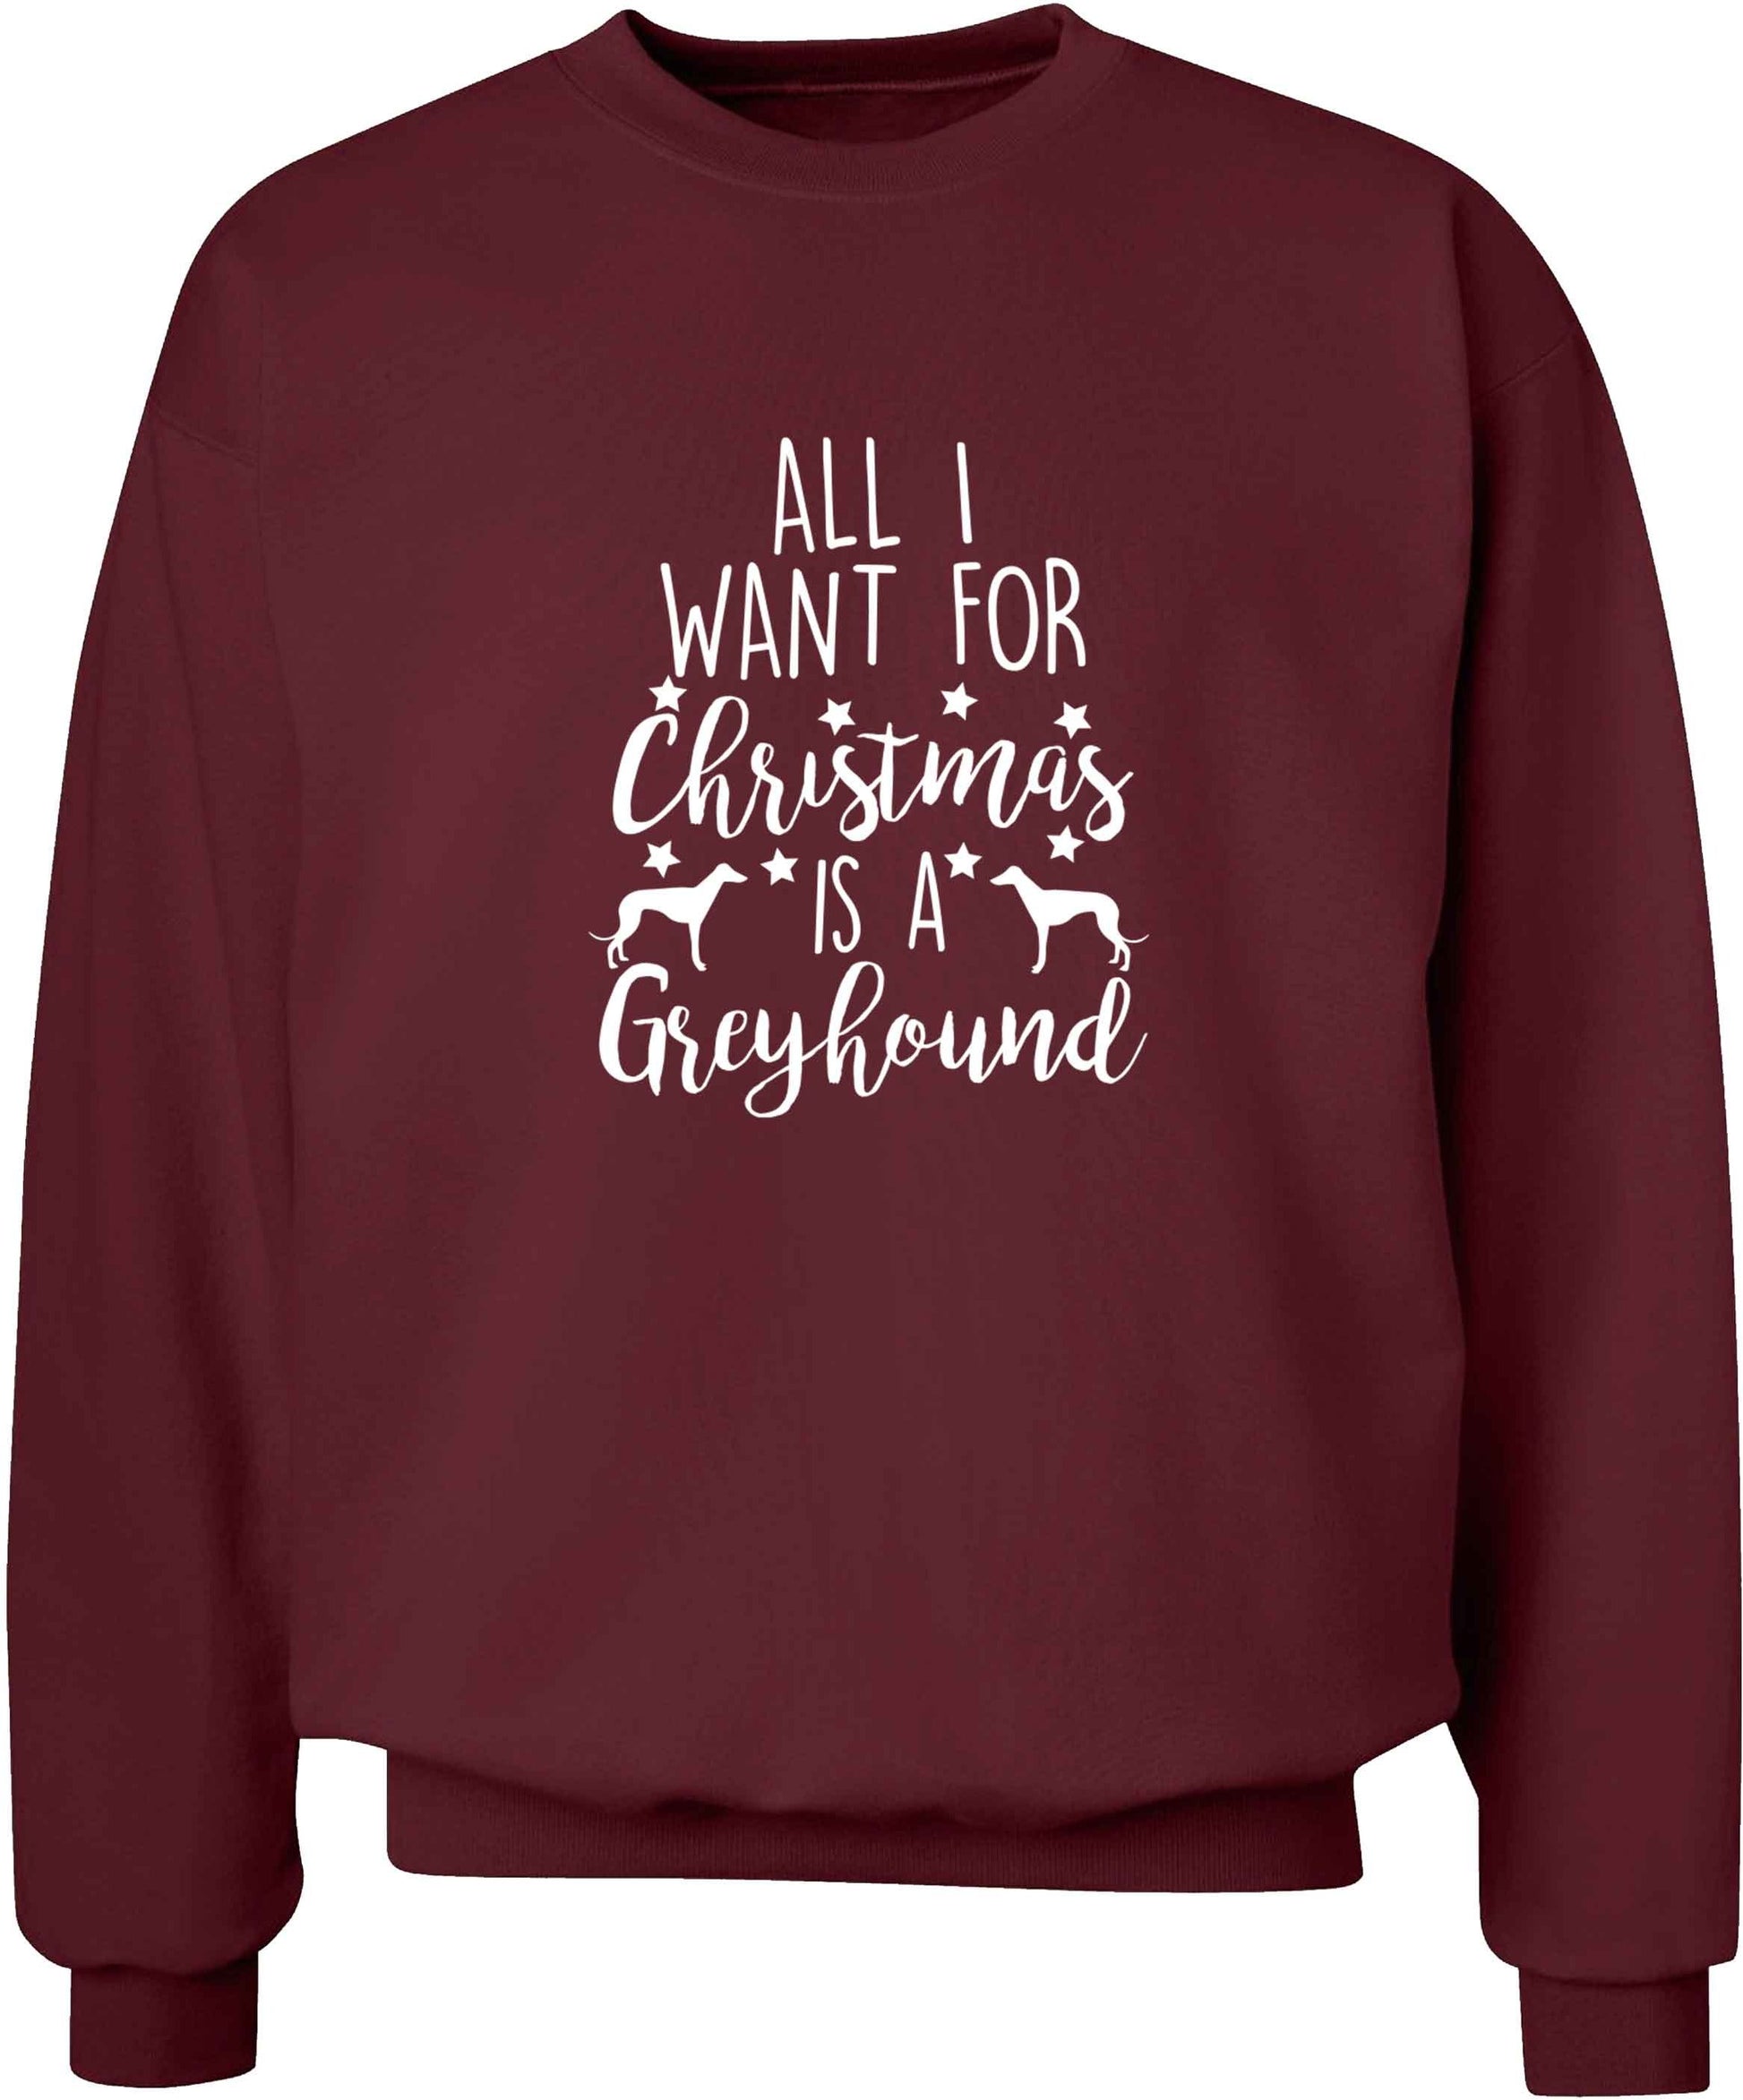 All I want for Christmas is a greyhound adult's unisex maroon sweater 2XL